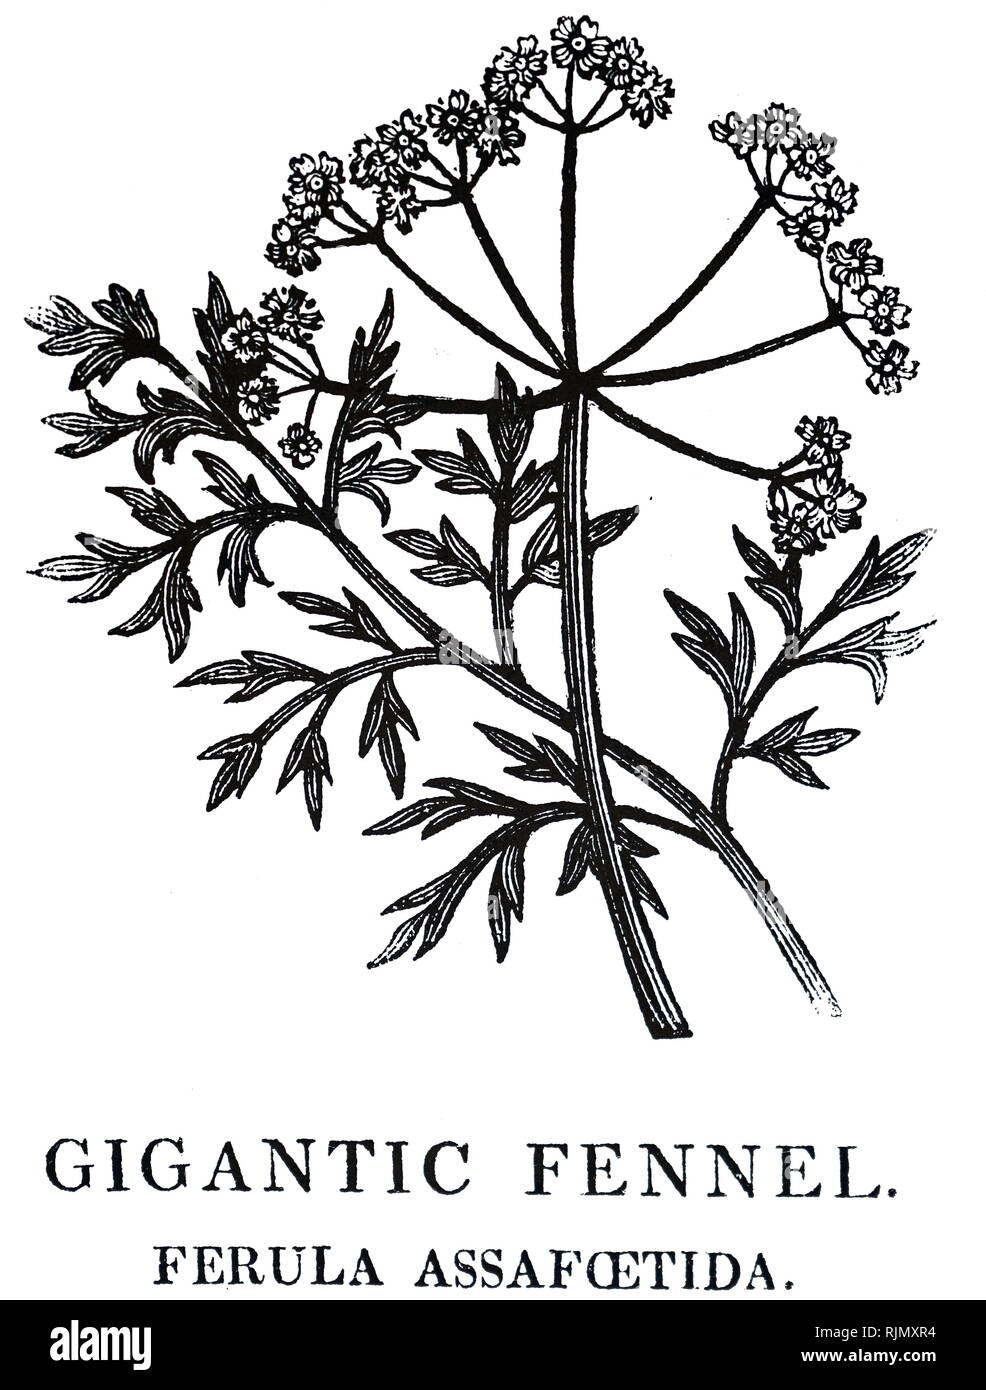 An engraving depicting Giant Fennel plant. From Robert John Thornton's 'A New Family Herbal', London, 1810. Woodcut by Thomas Bewick Stock Photo